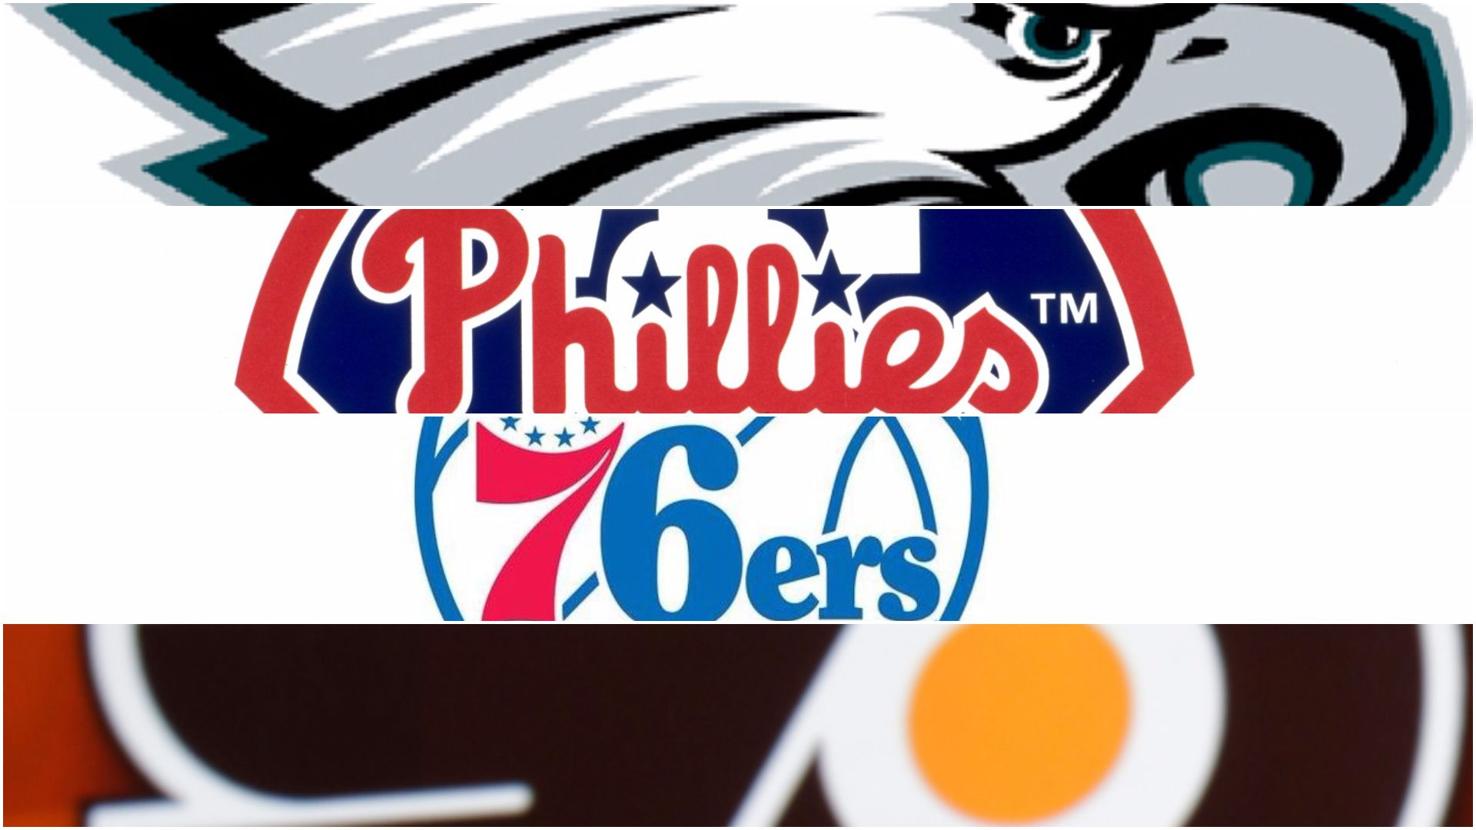 Eagles Phillies Flyers Sixers Who Will Win Philadelphias Next Championship Sports